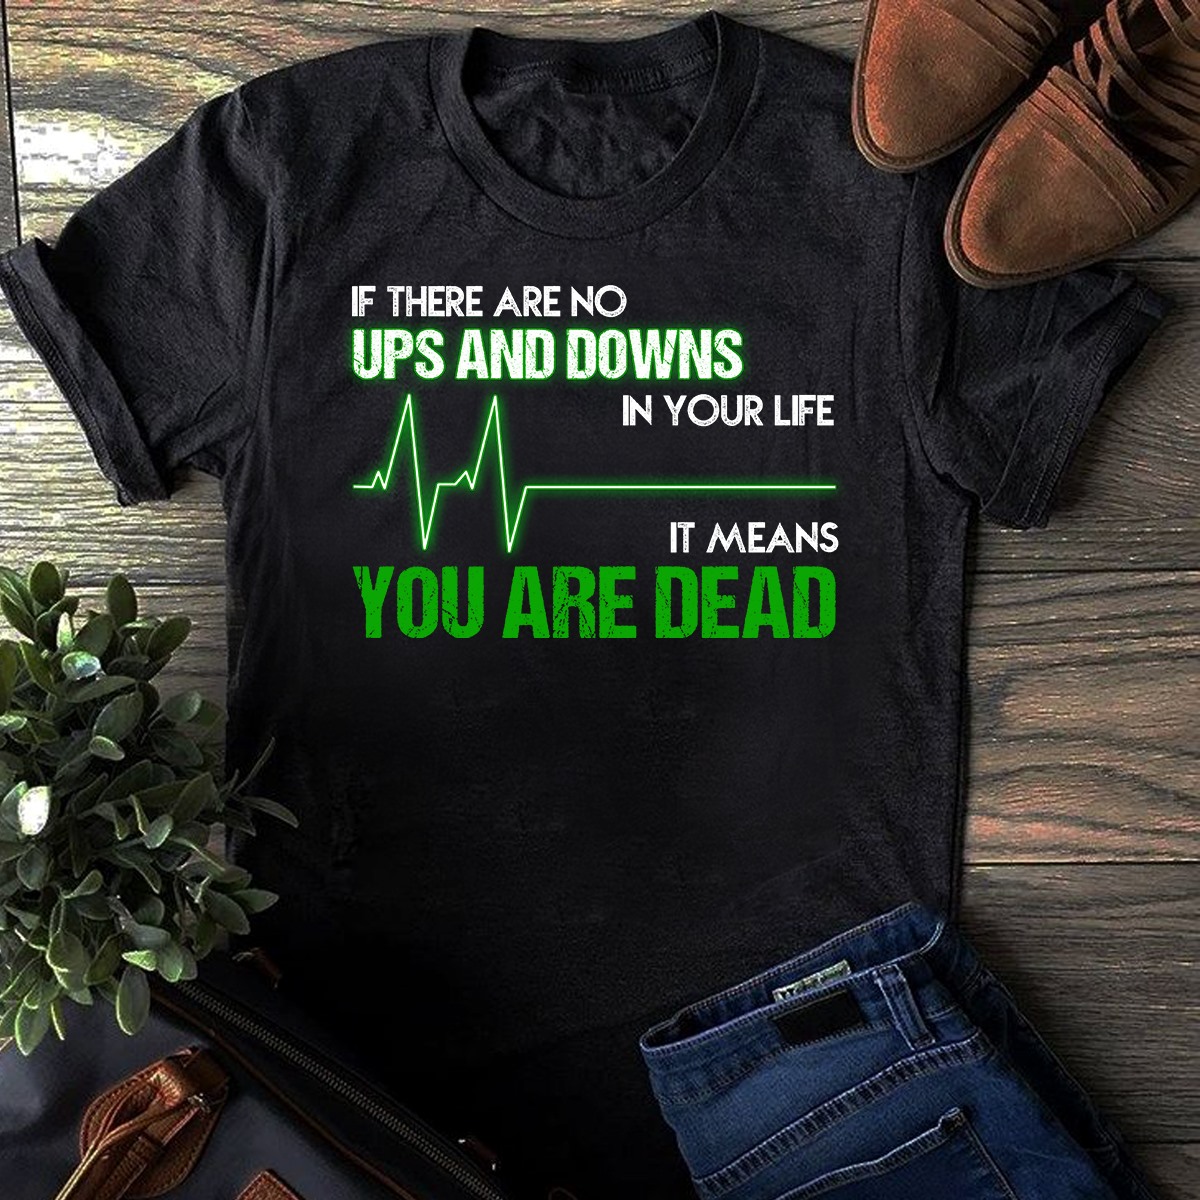 If there are no ups and downs in your life it means you are dead